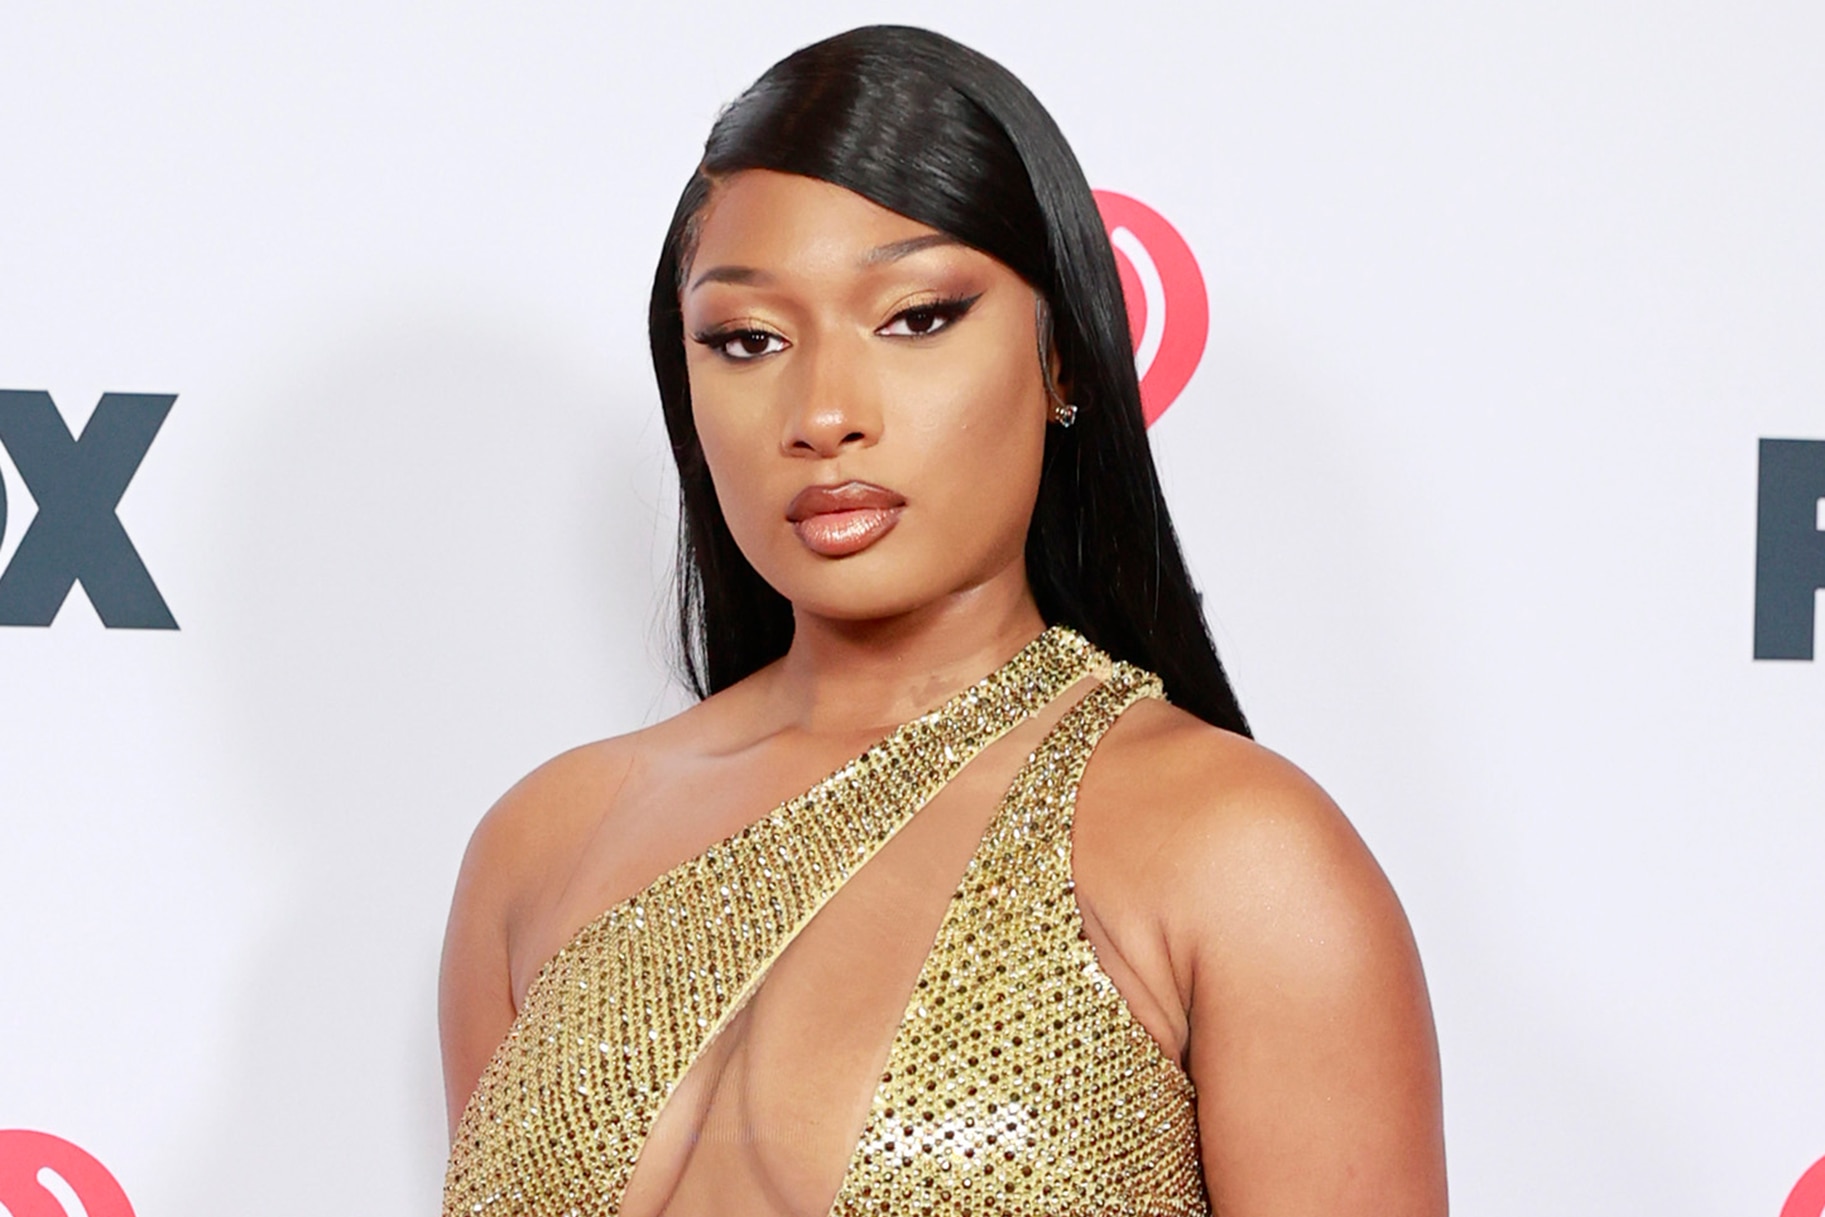 Megan Thee Stallion attends the 2021 iHeartRadio Music Awards